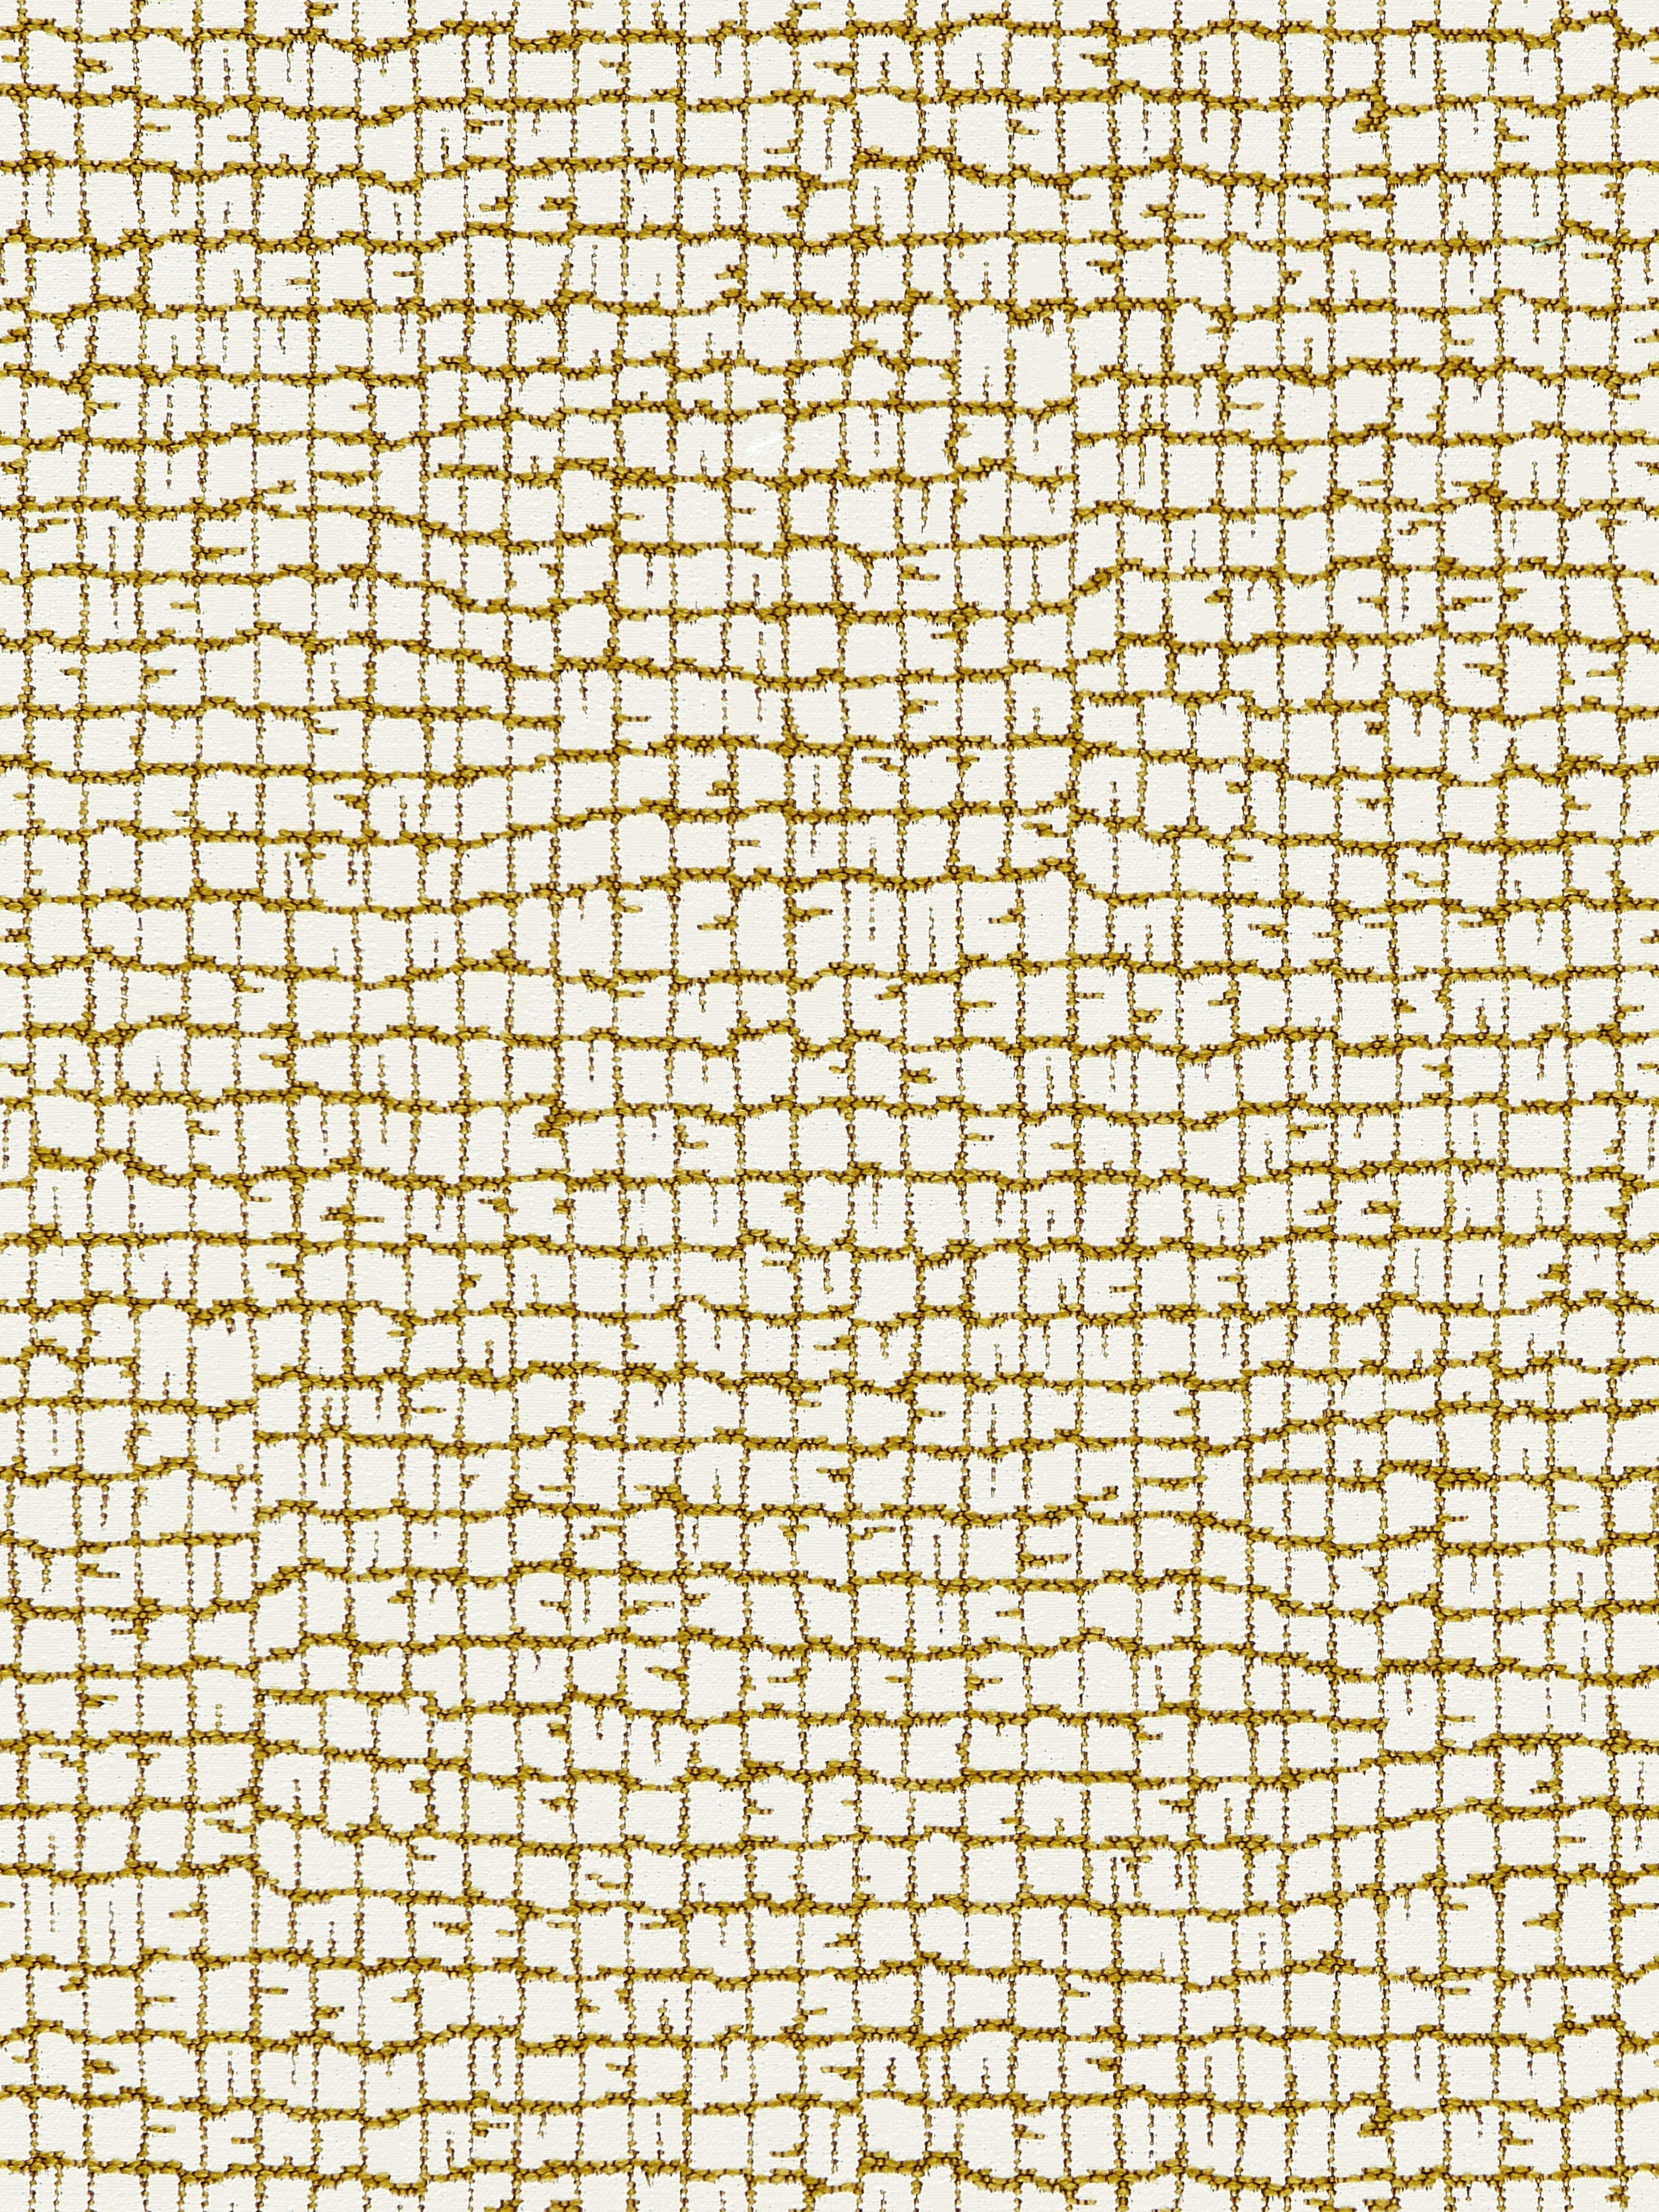 Troya Beach fabric in gold color - pattern number PO 0003TROY - by Scalamandre in the Old World Weavers collection